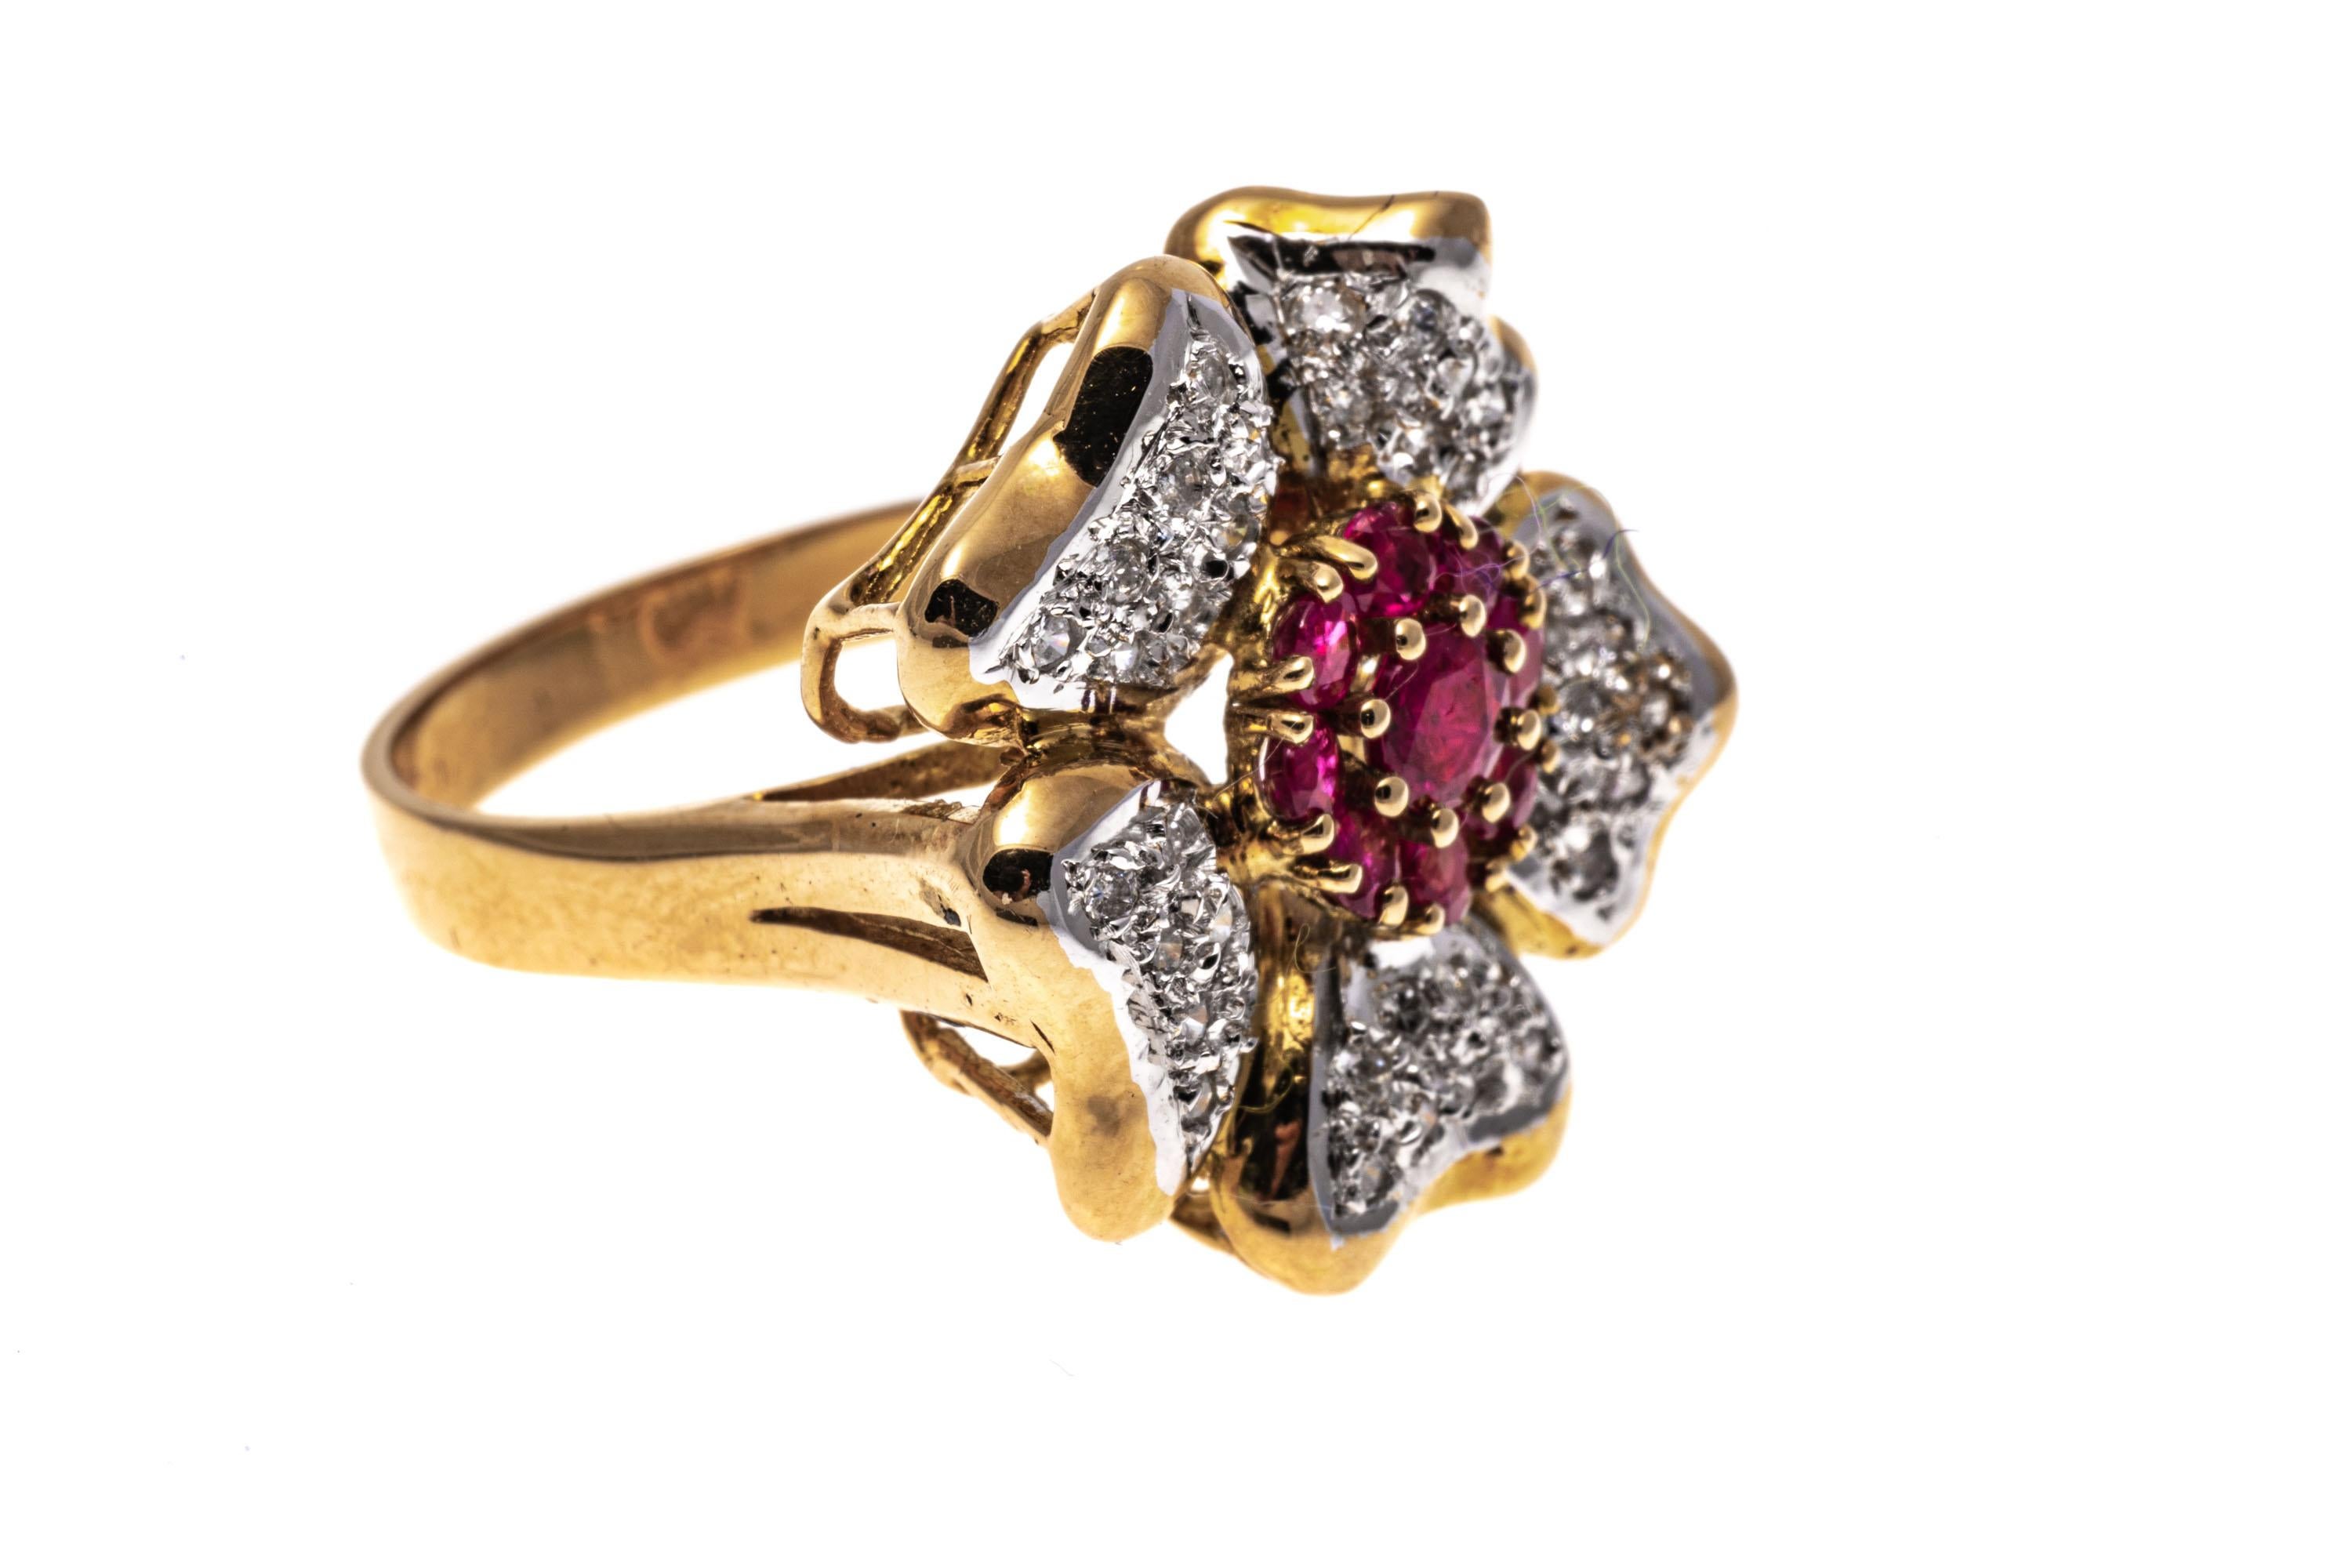 14k yellow gold ring. This fabulous flower motif ring is set with a center cluster of round faceted, reddish pink rubies, approximately 0.85 TCW, prong set and surrounded by five pave set, round faceted diamond petals, approximately 0.19 TCW,